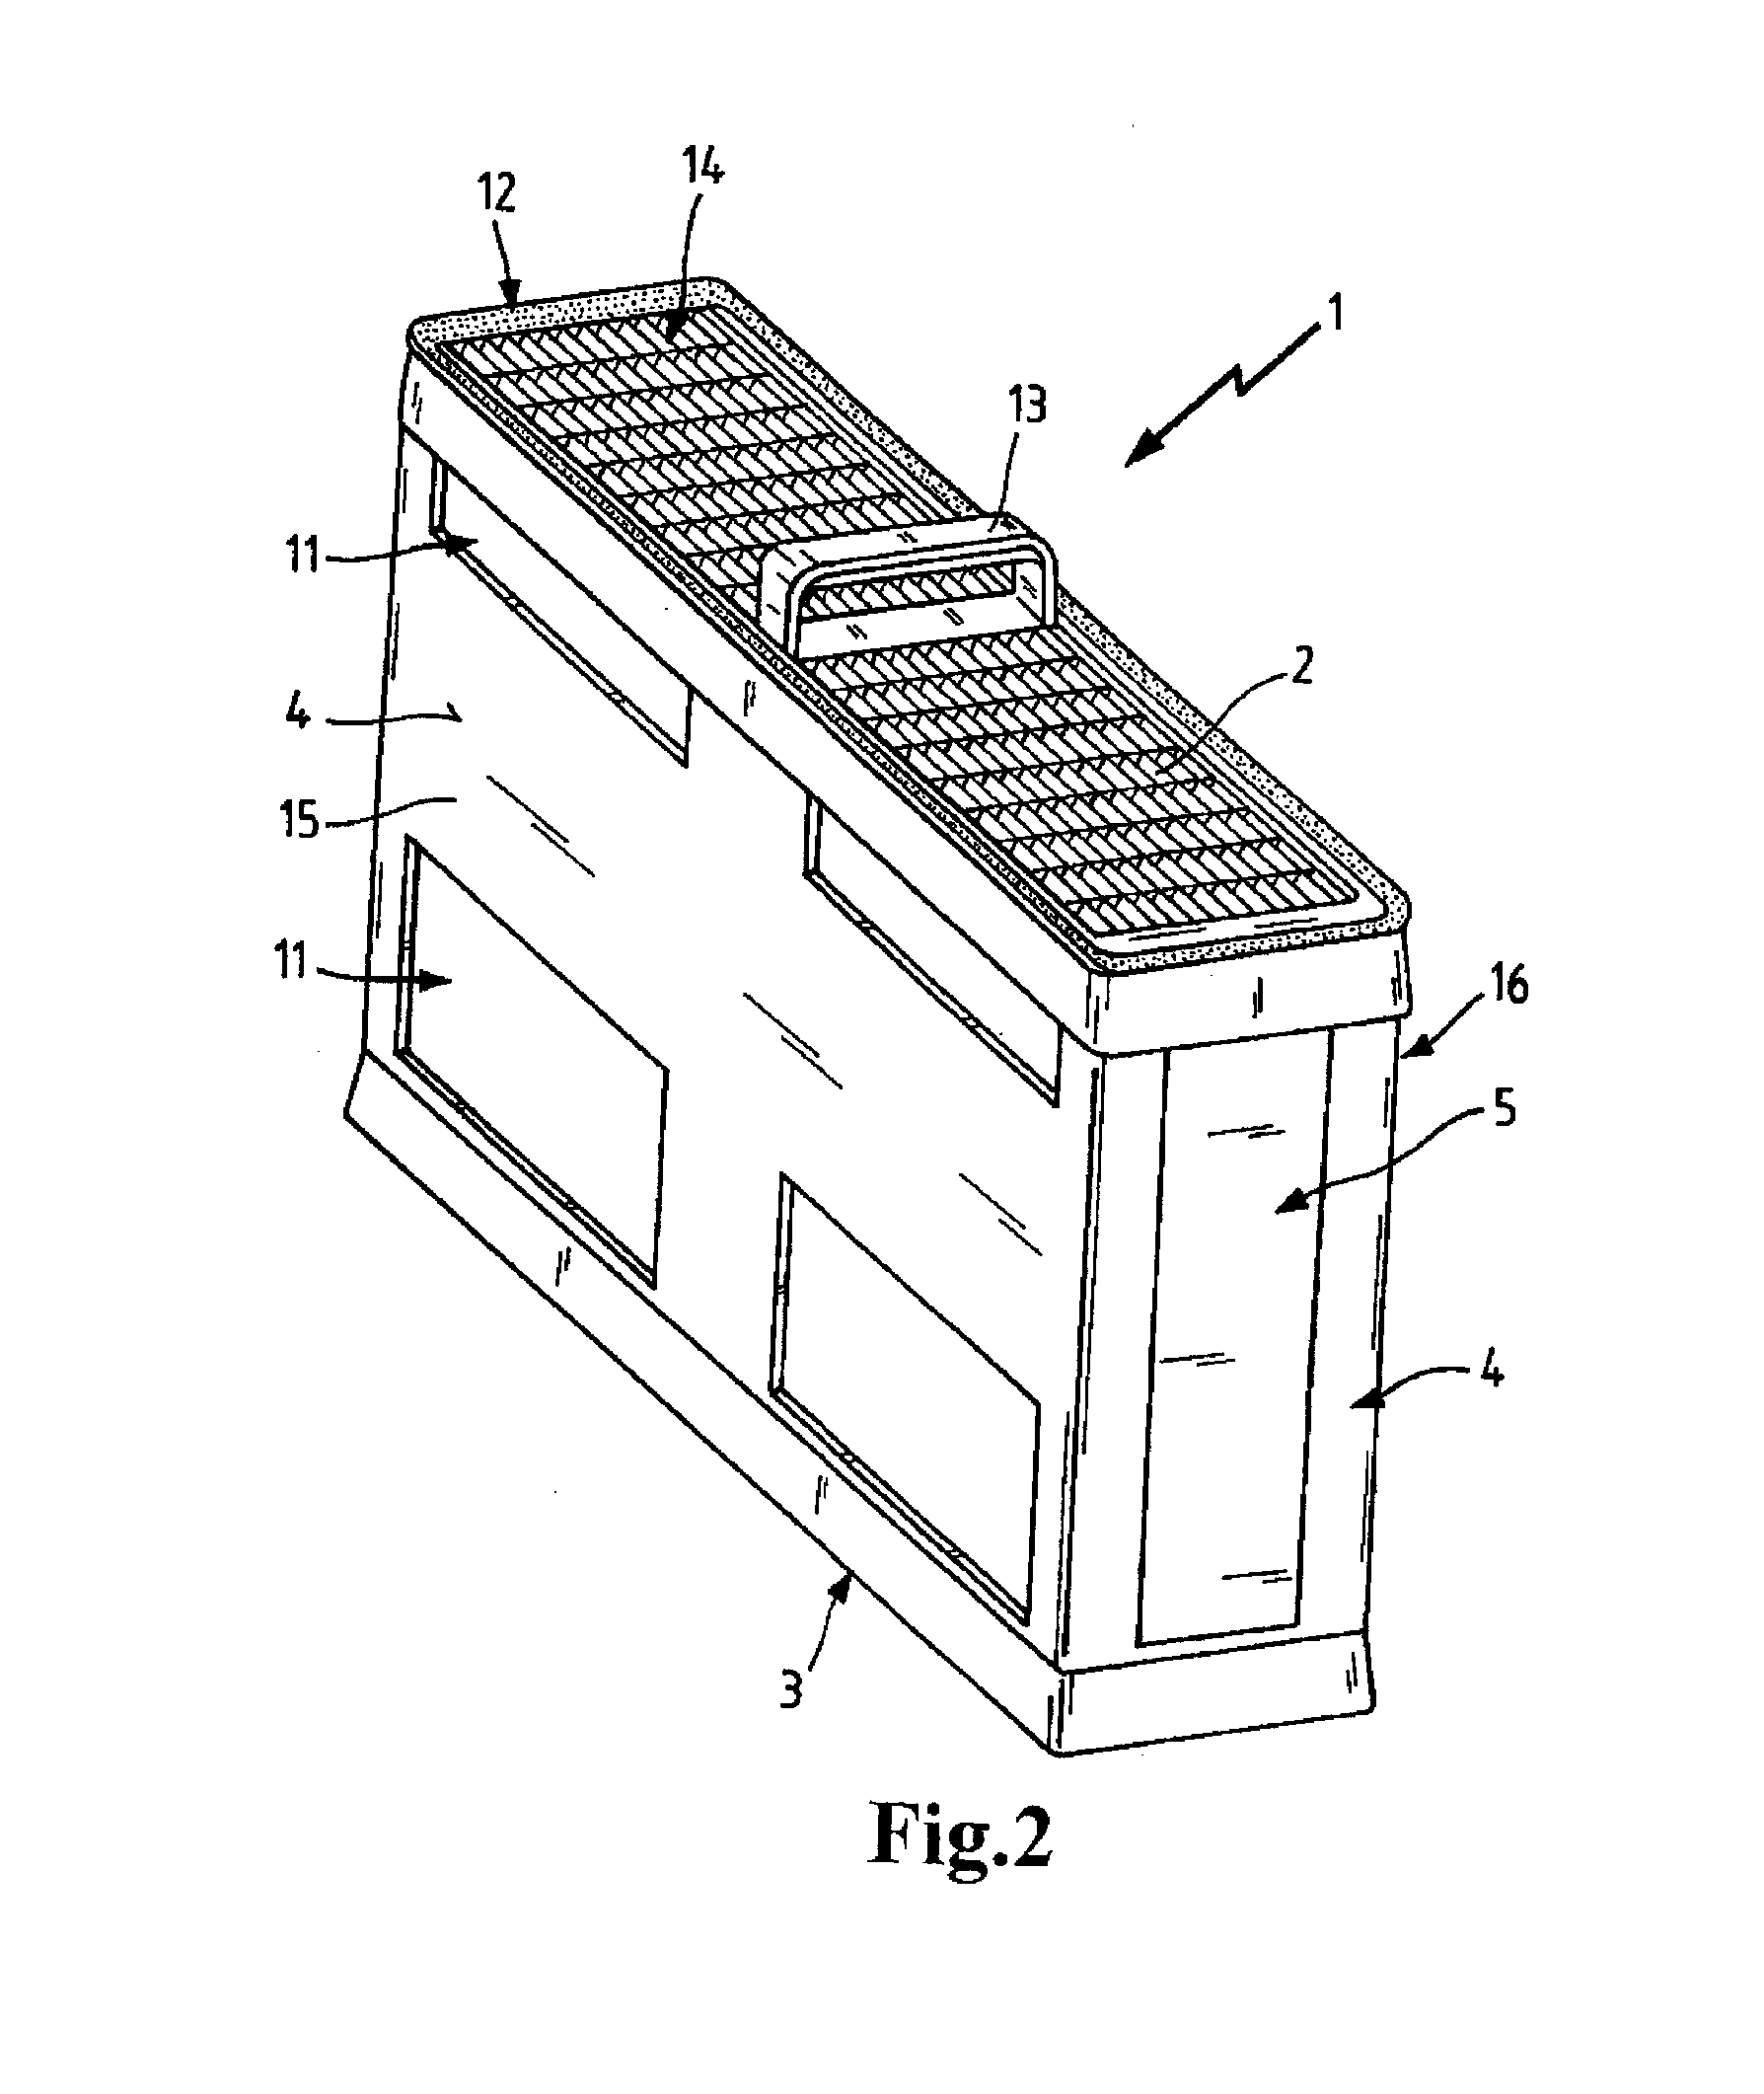 Filter for Filtering Fluids and Method for Producing the Same